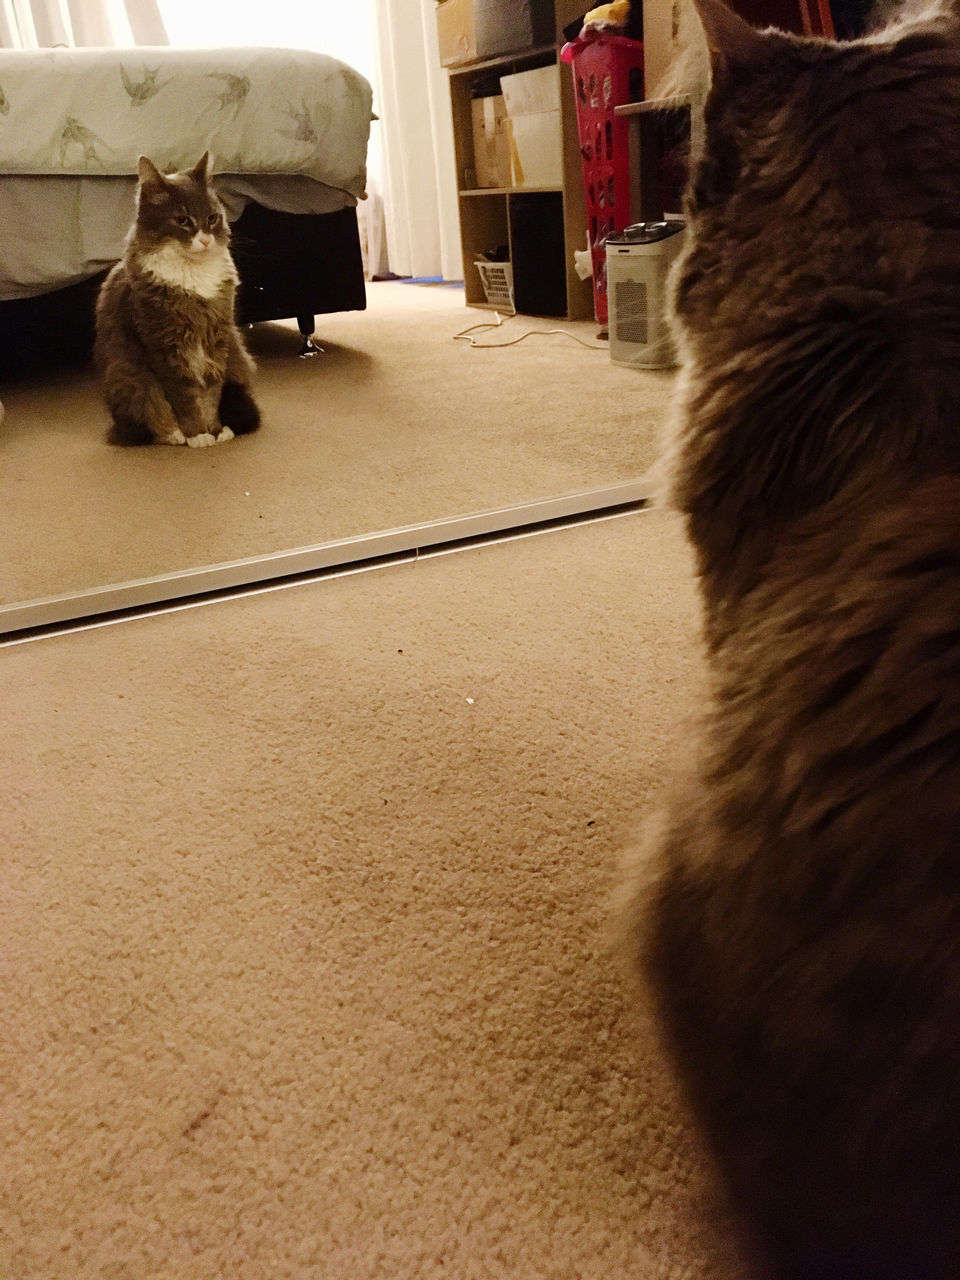 REAR VIEW OF CAT SITTING ON FLOOR